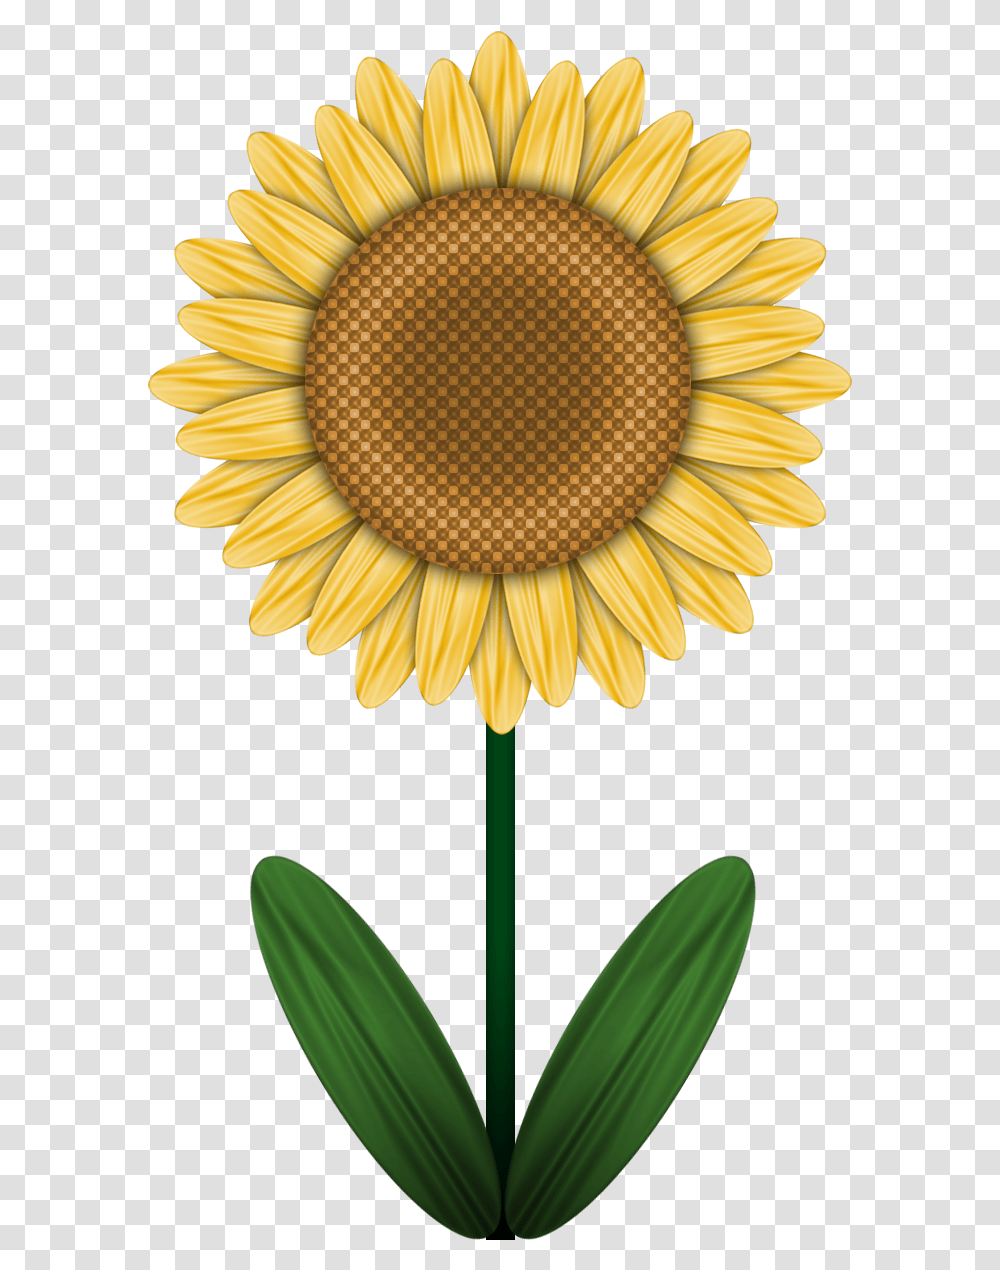 Clip Shoes Sunflower Brighton, Plant, Blossom, Daisy, Daisies Transparent Png